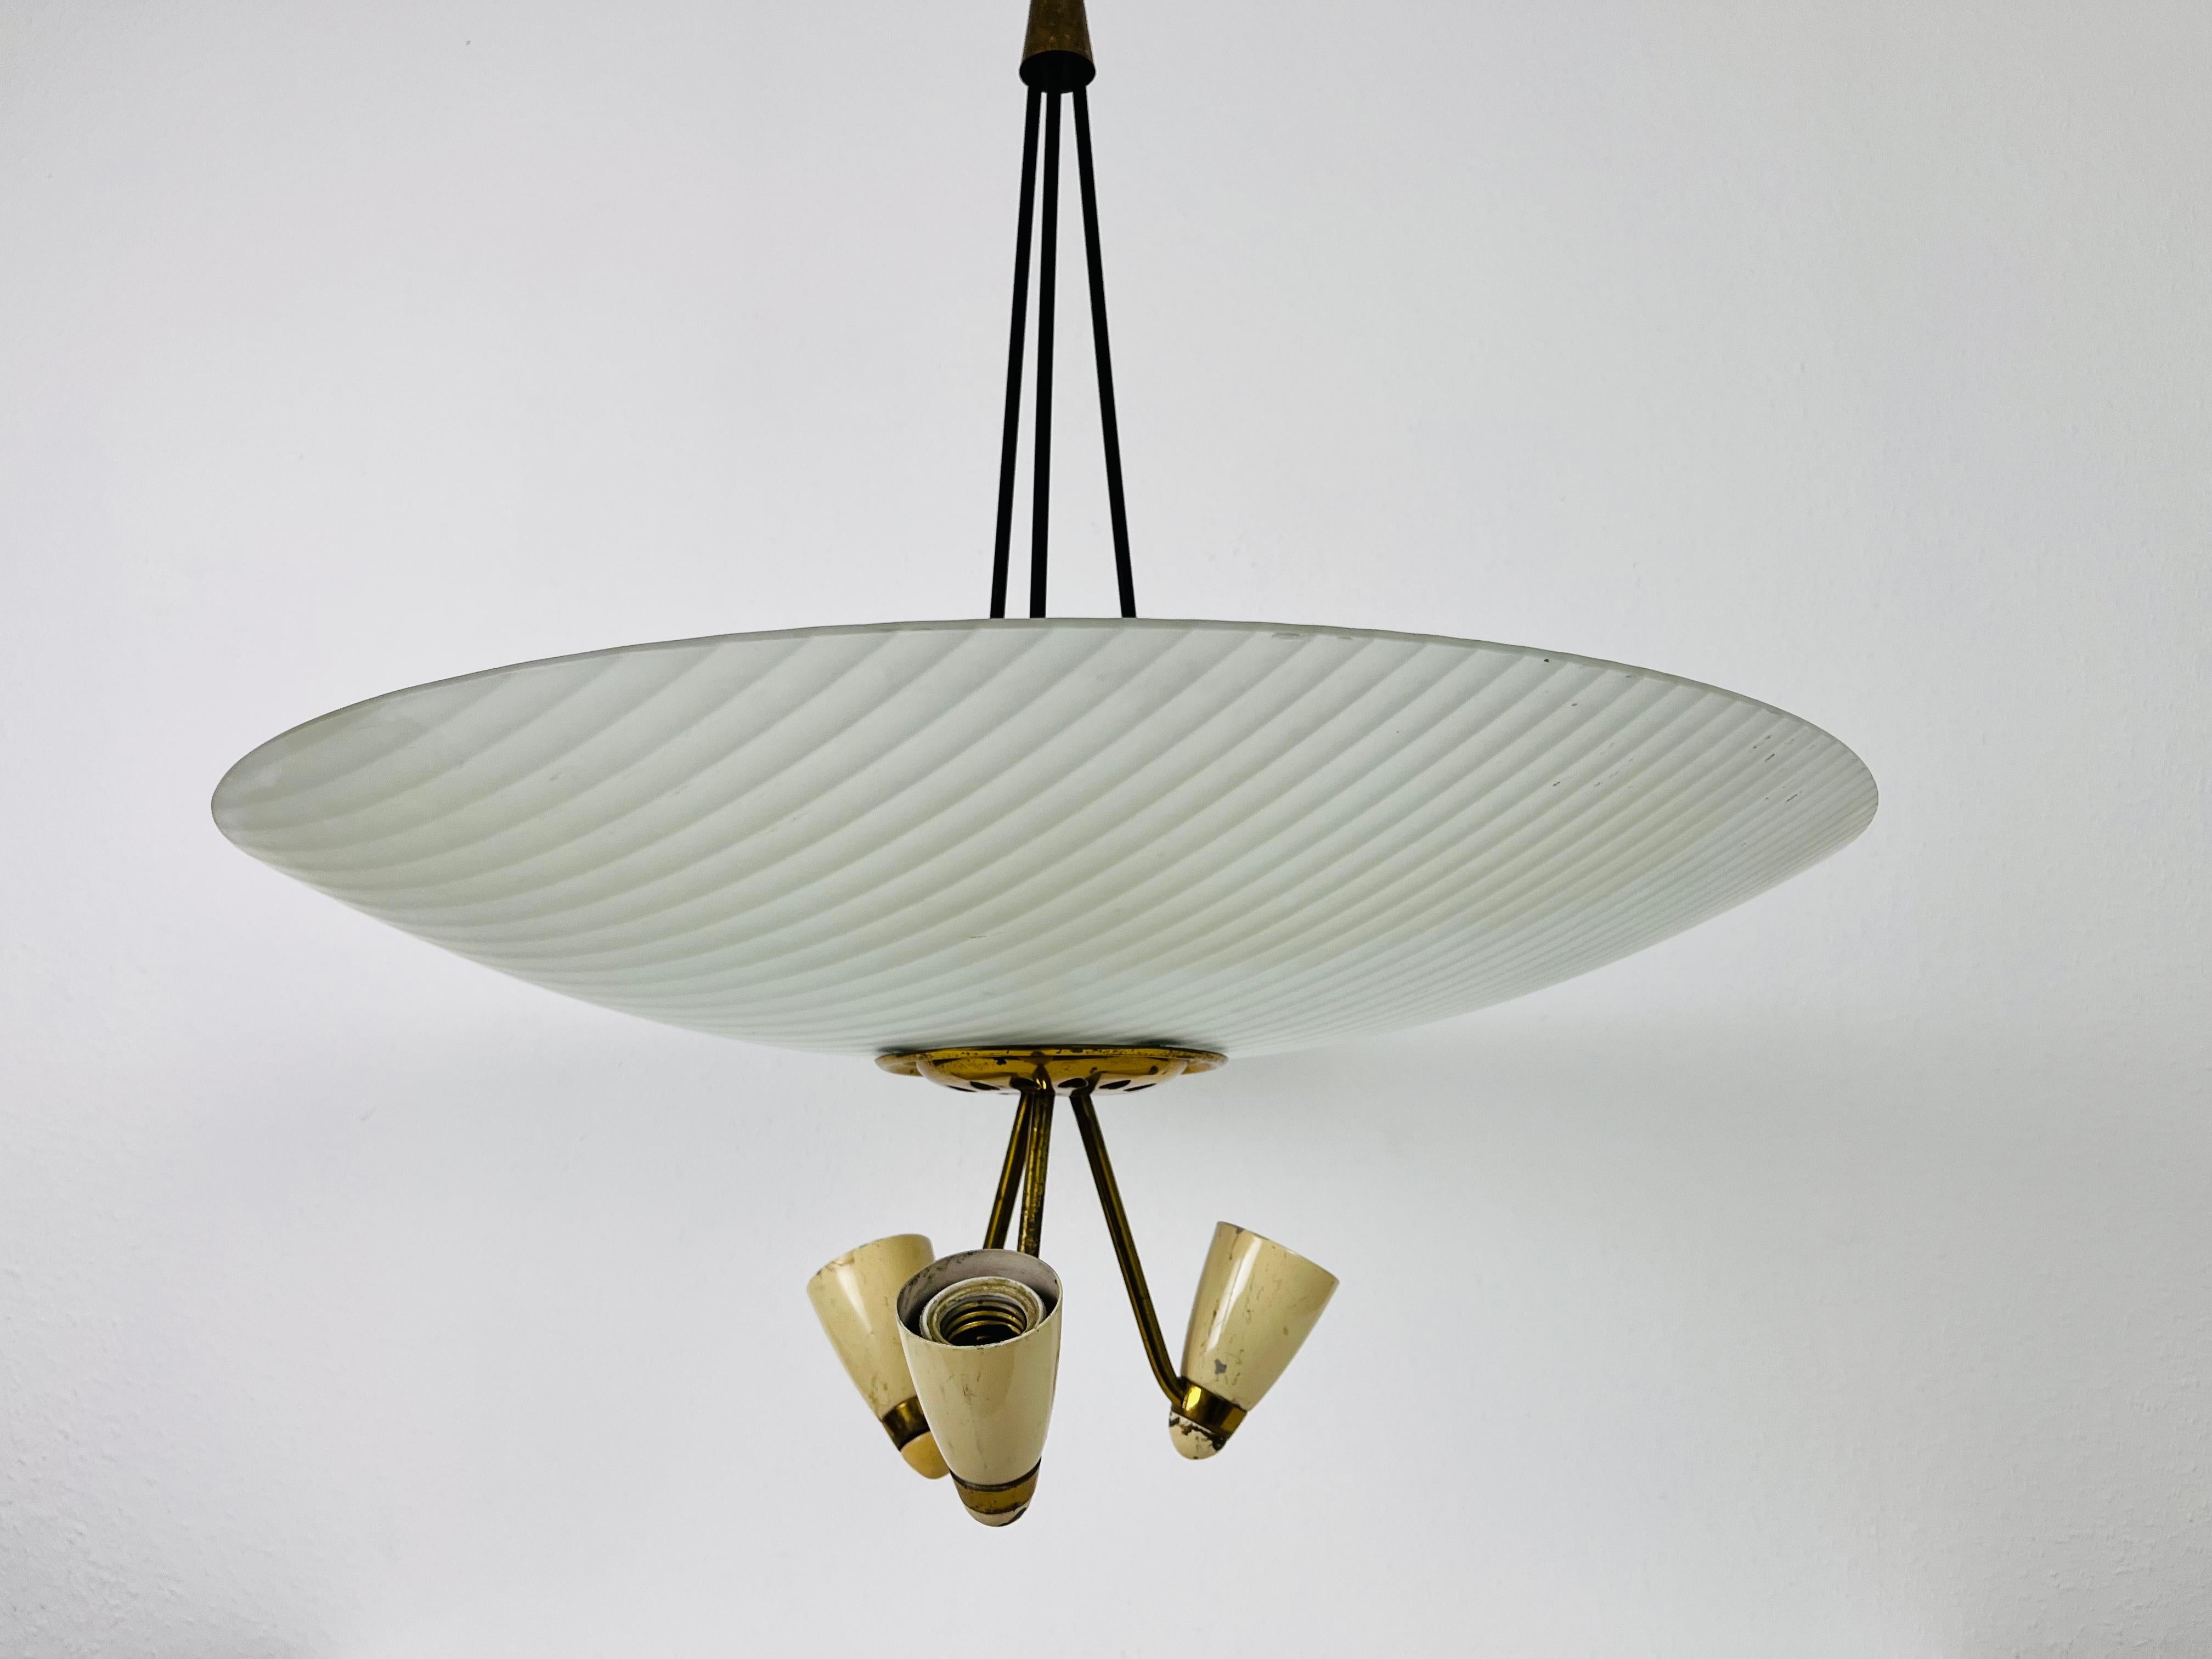 Italian Midcentury Brass and Glass Chandelier, 1950s In Good Condition For Sale In Hagenbach, DE